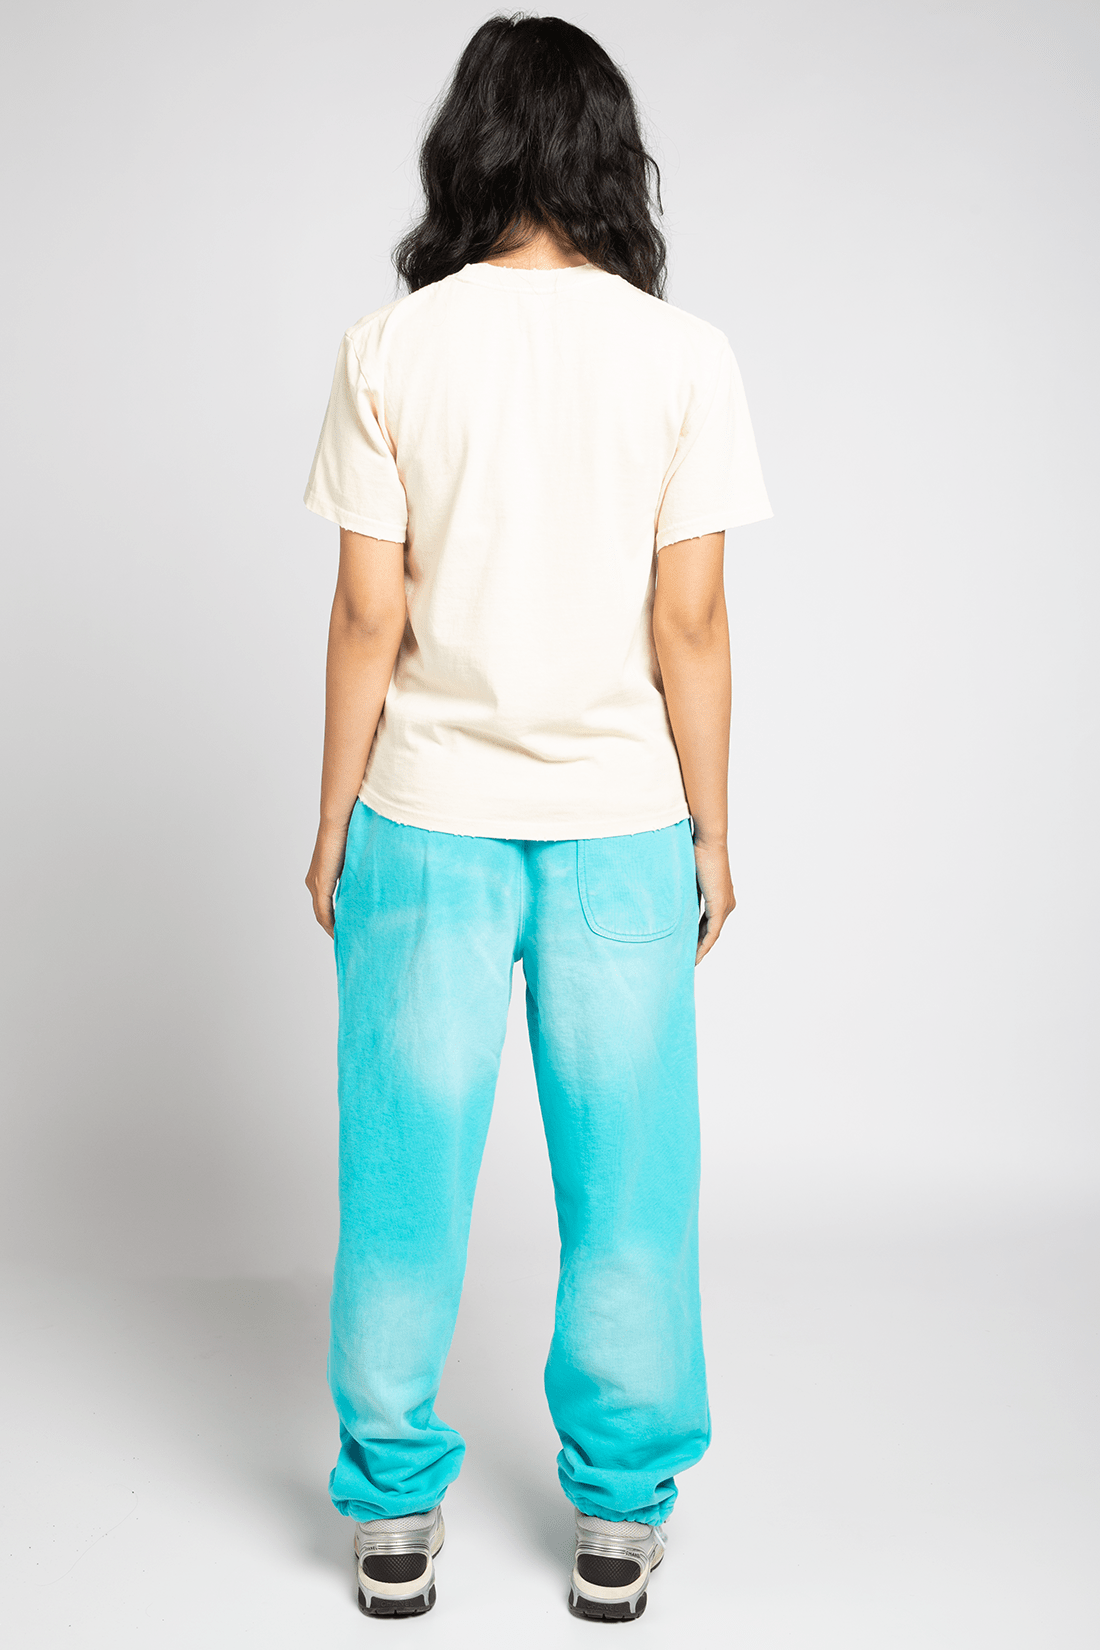 Offshore Sweatpants Recess - Blue Faded – Exclusive MADE